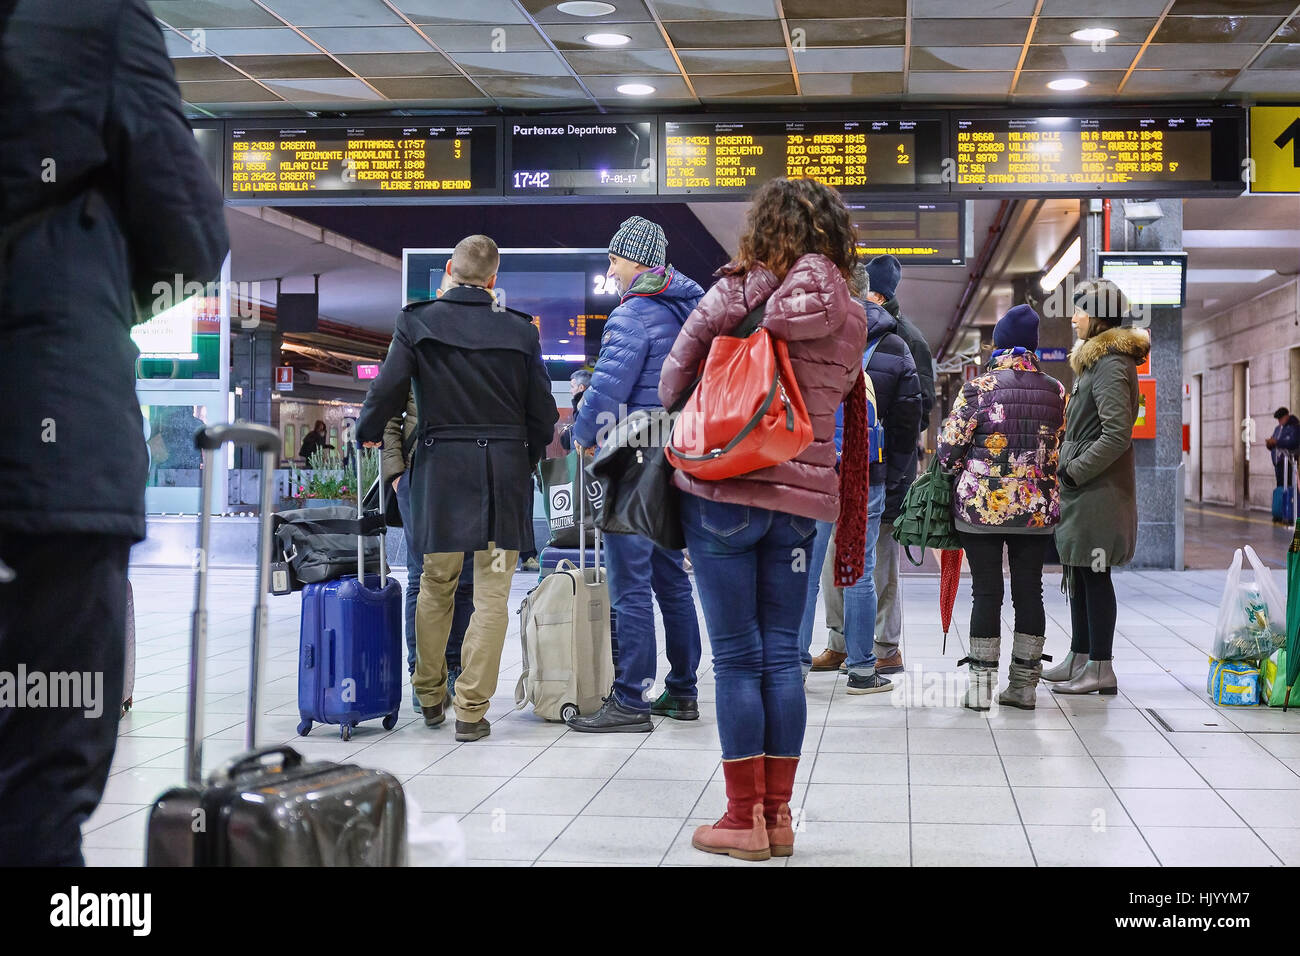 Naples, Italy - January 17, 2017: Some passengers with luggage waiting for the arrival of the train, watching the board of arrivals / departures Stock Photo